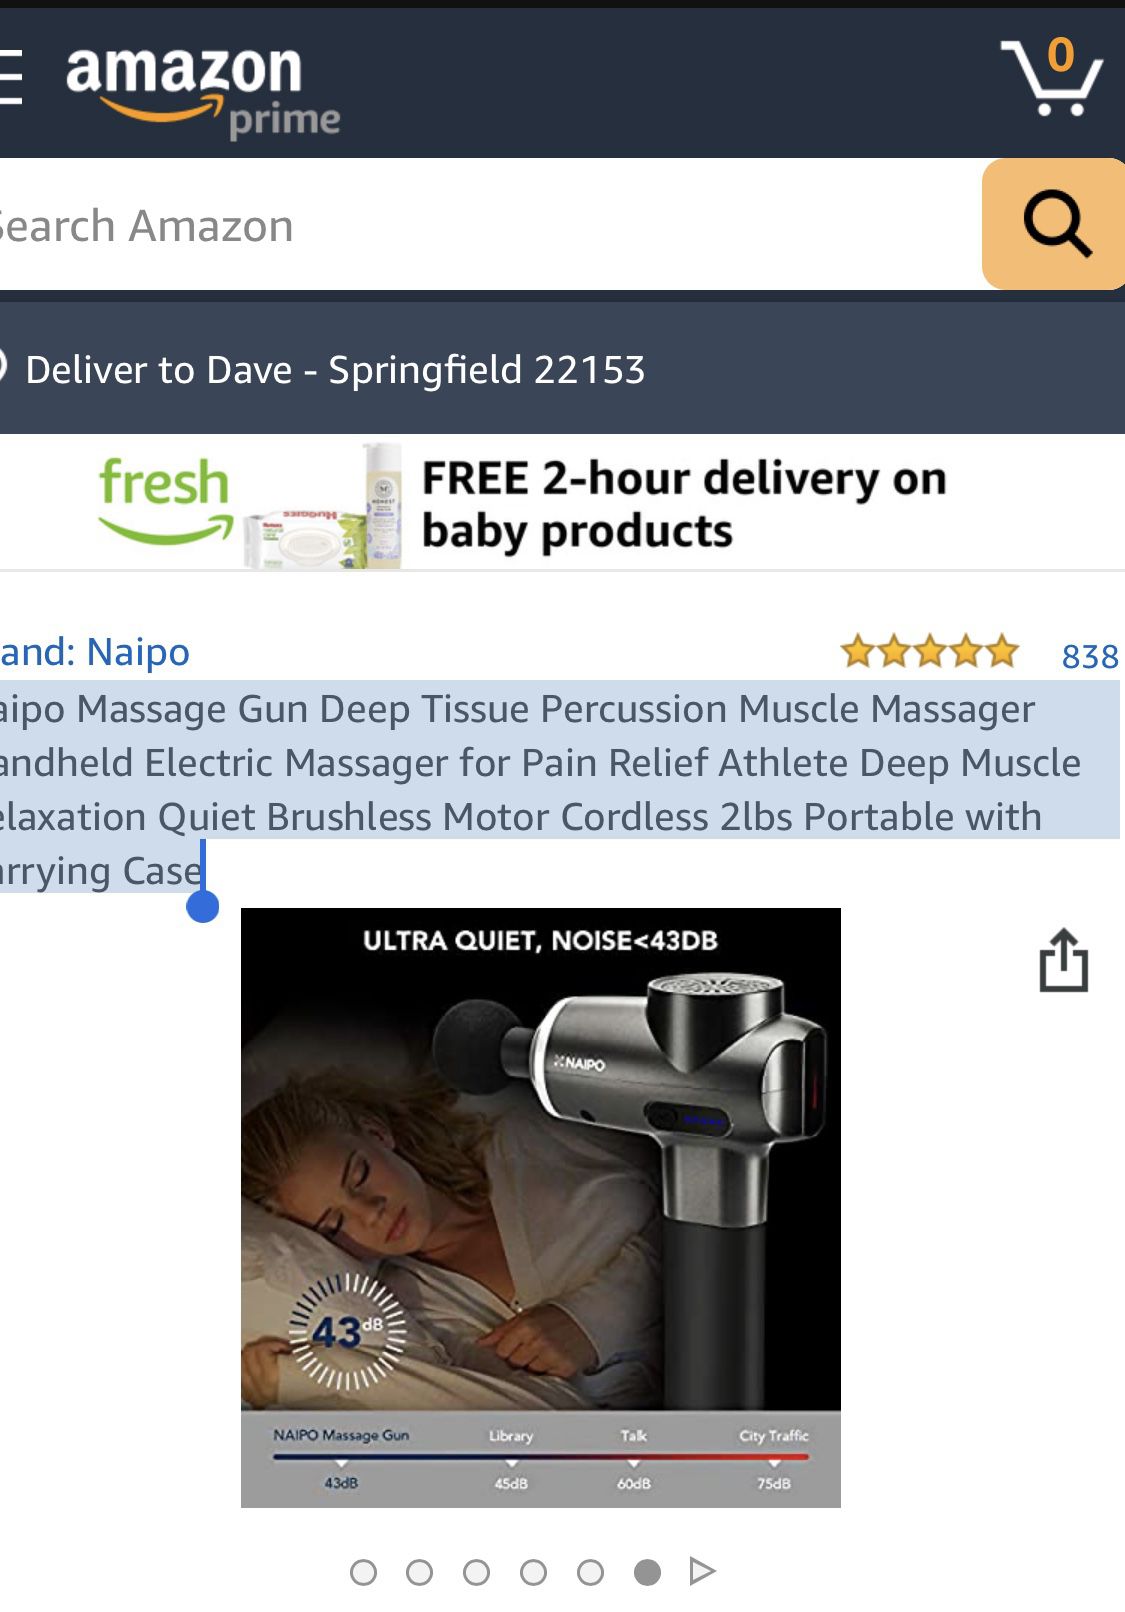 Naipo Massage Gun Deep Tissue Percussion Muscle Massager Handheld Electric Massager for Pain Relief Athlete Deep Muscle Relaxation Quiet Brushless Mo